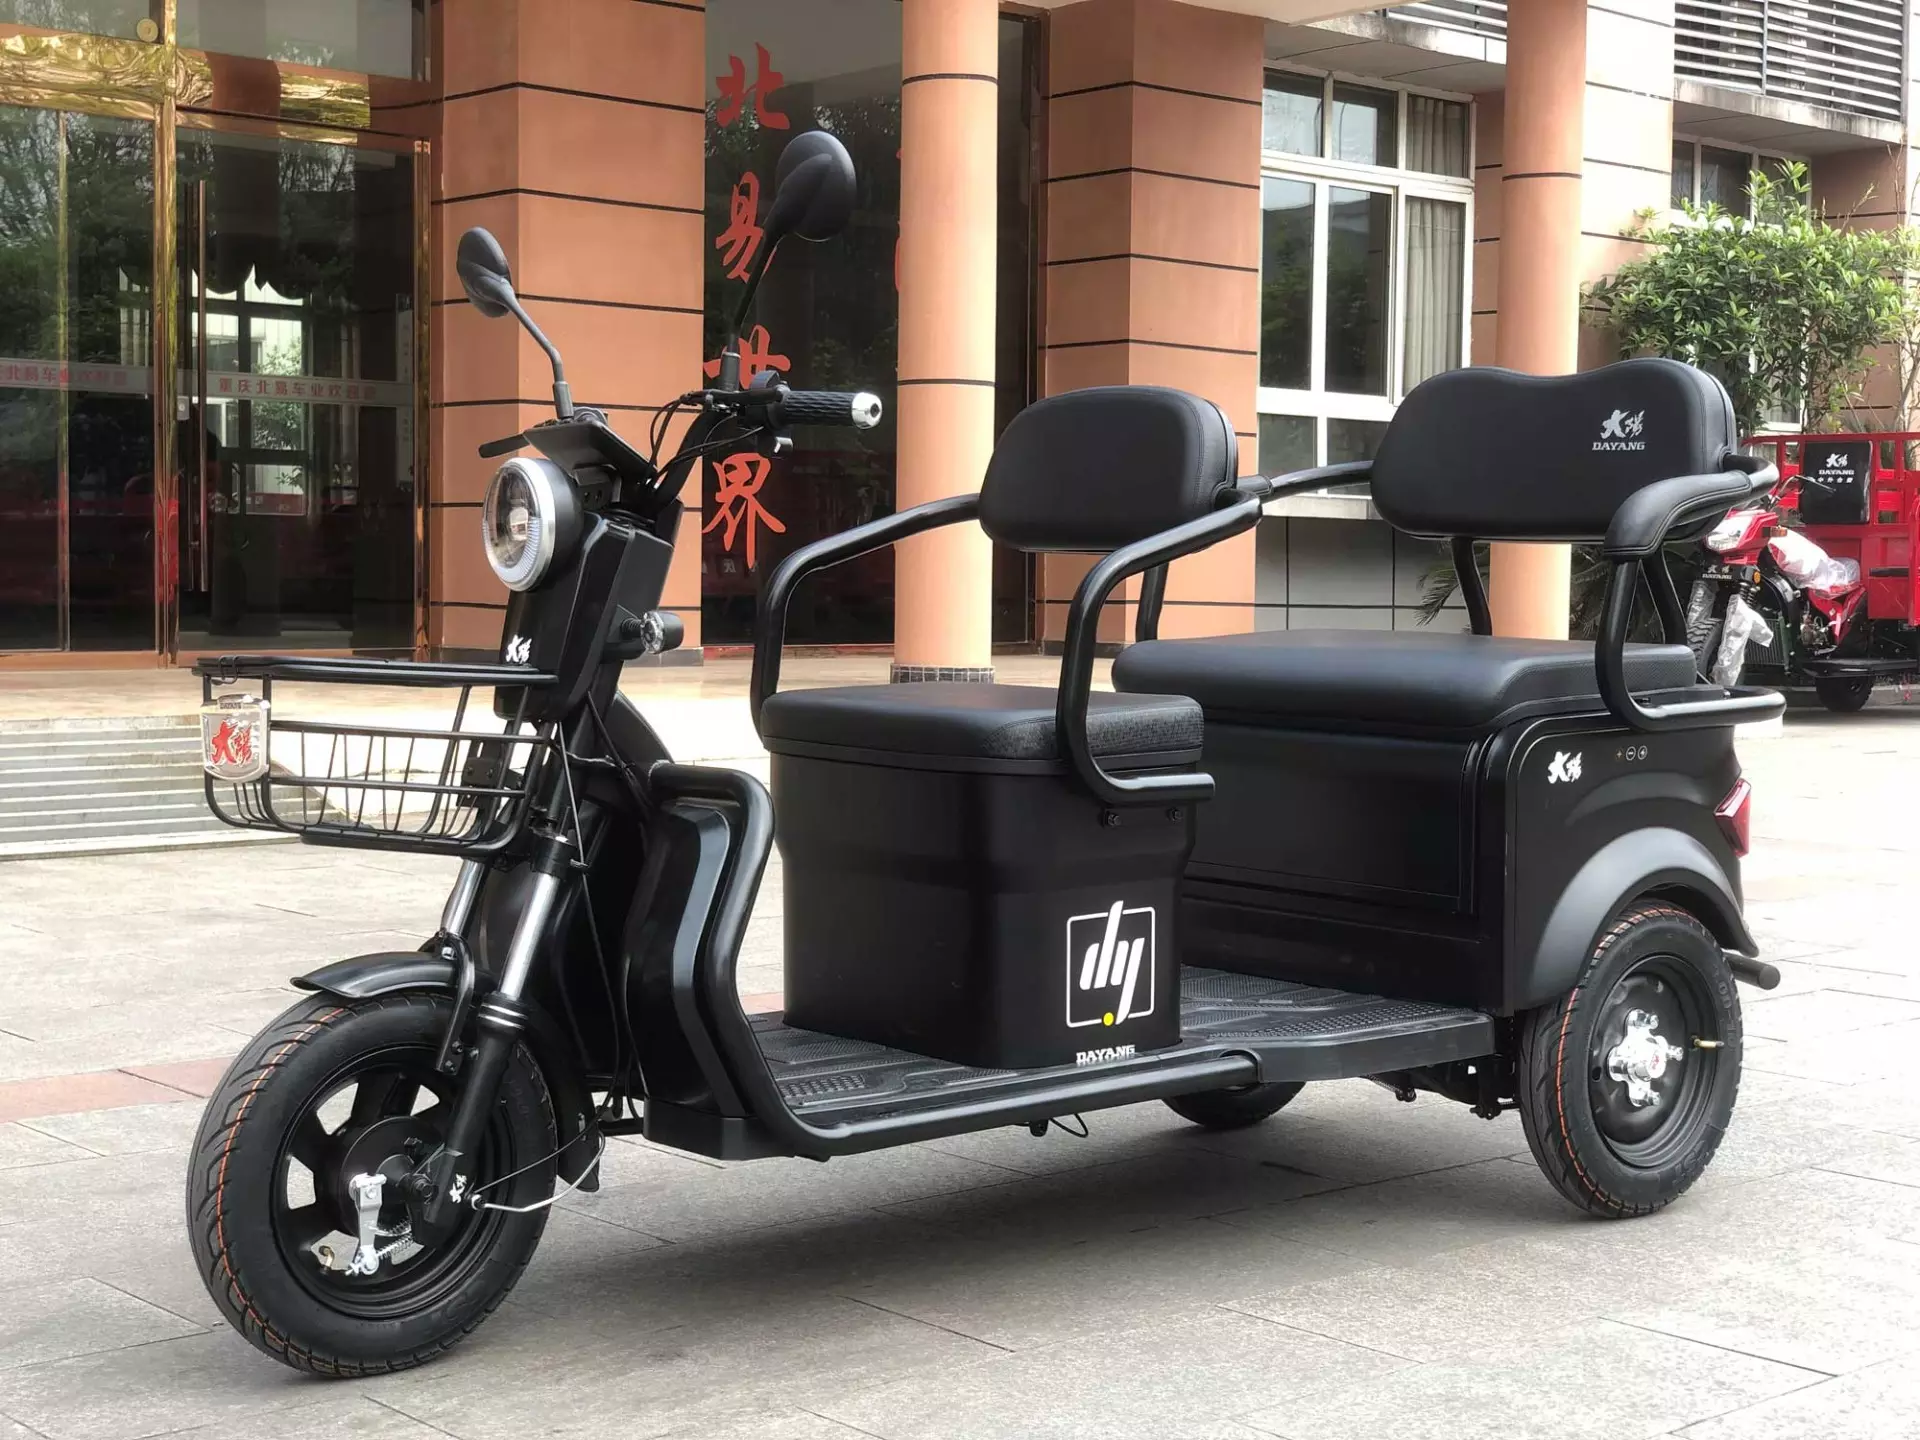 NEW FASHION DAYANG China factory hot Sale electric 3 wheel tricycle electric cargo tricycle passenger tricycle with low price